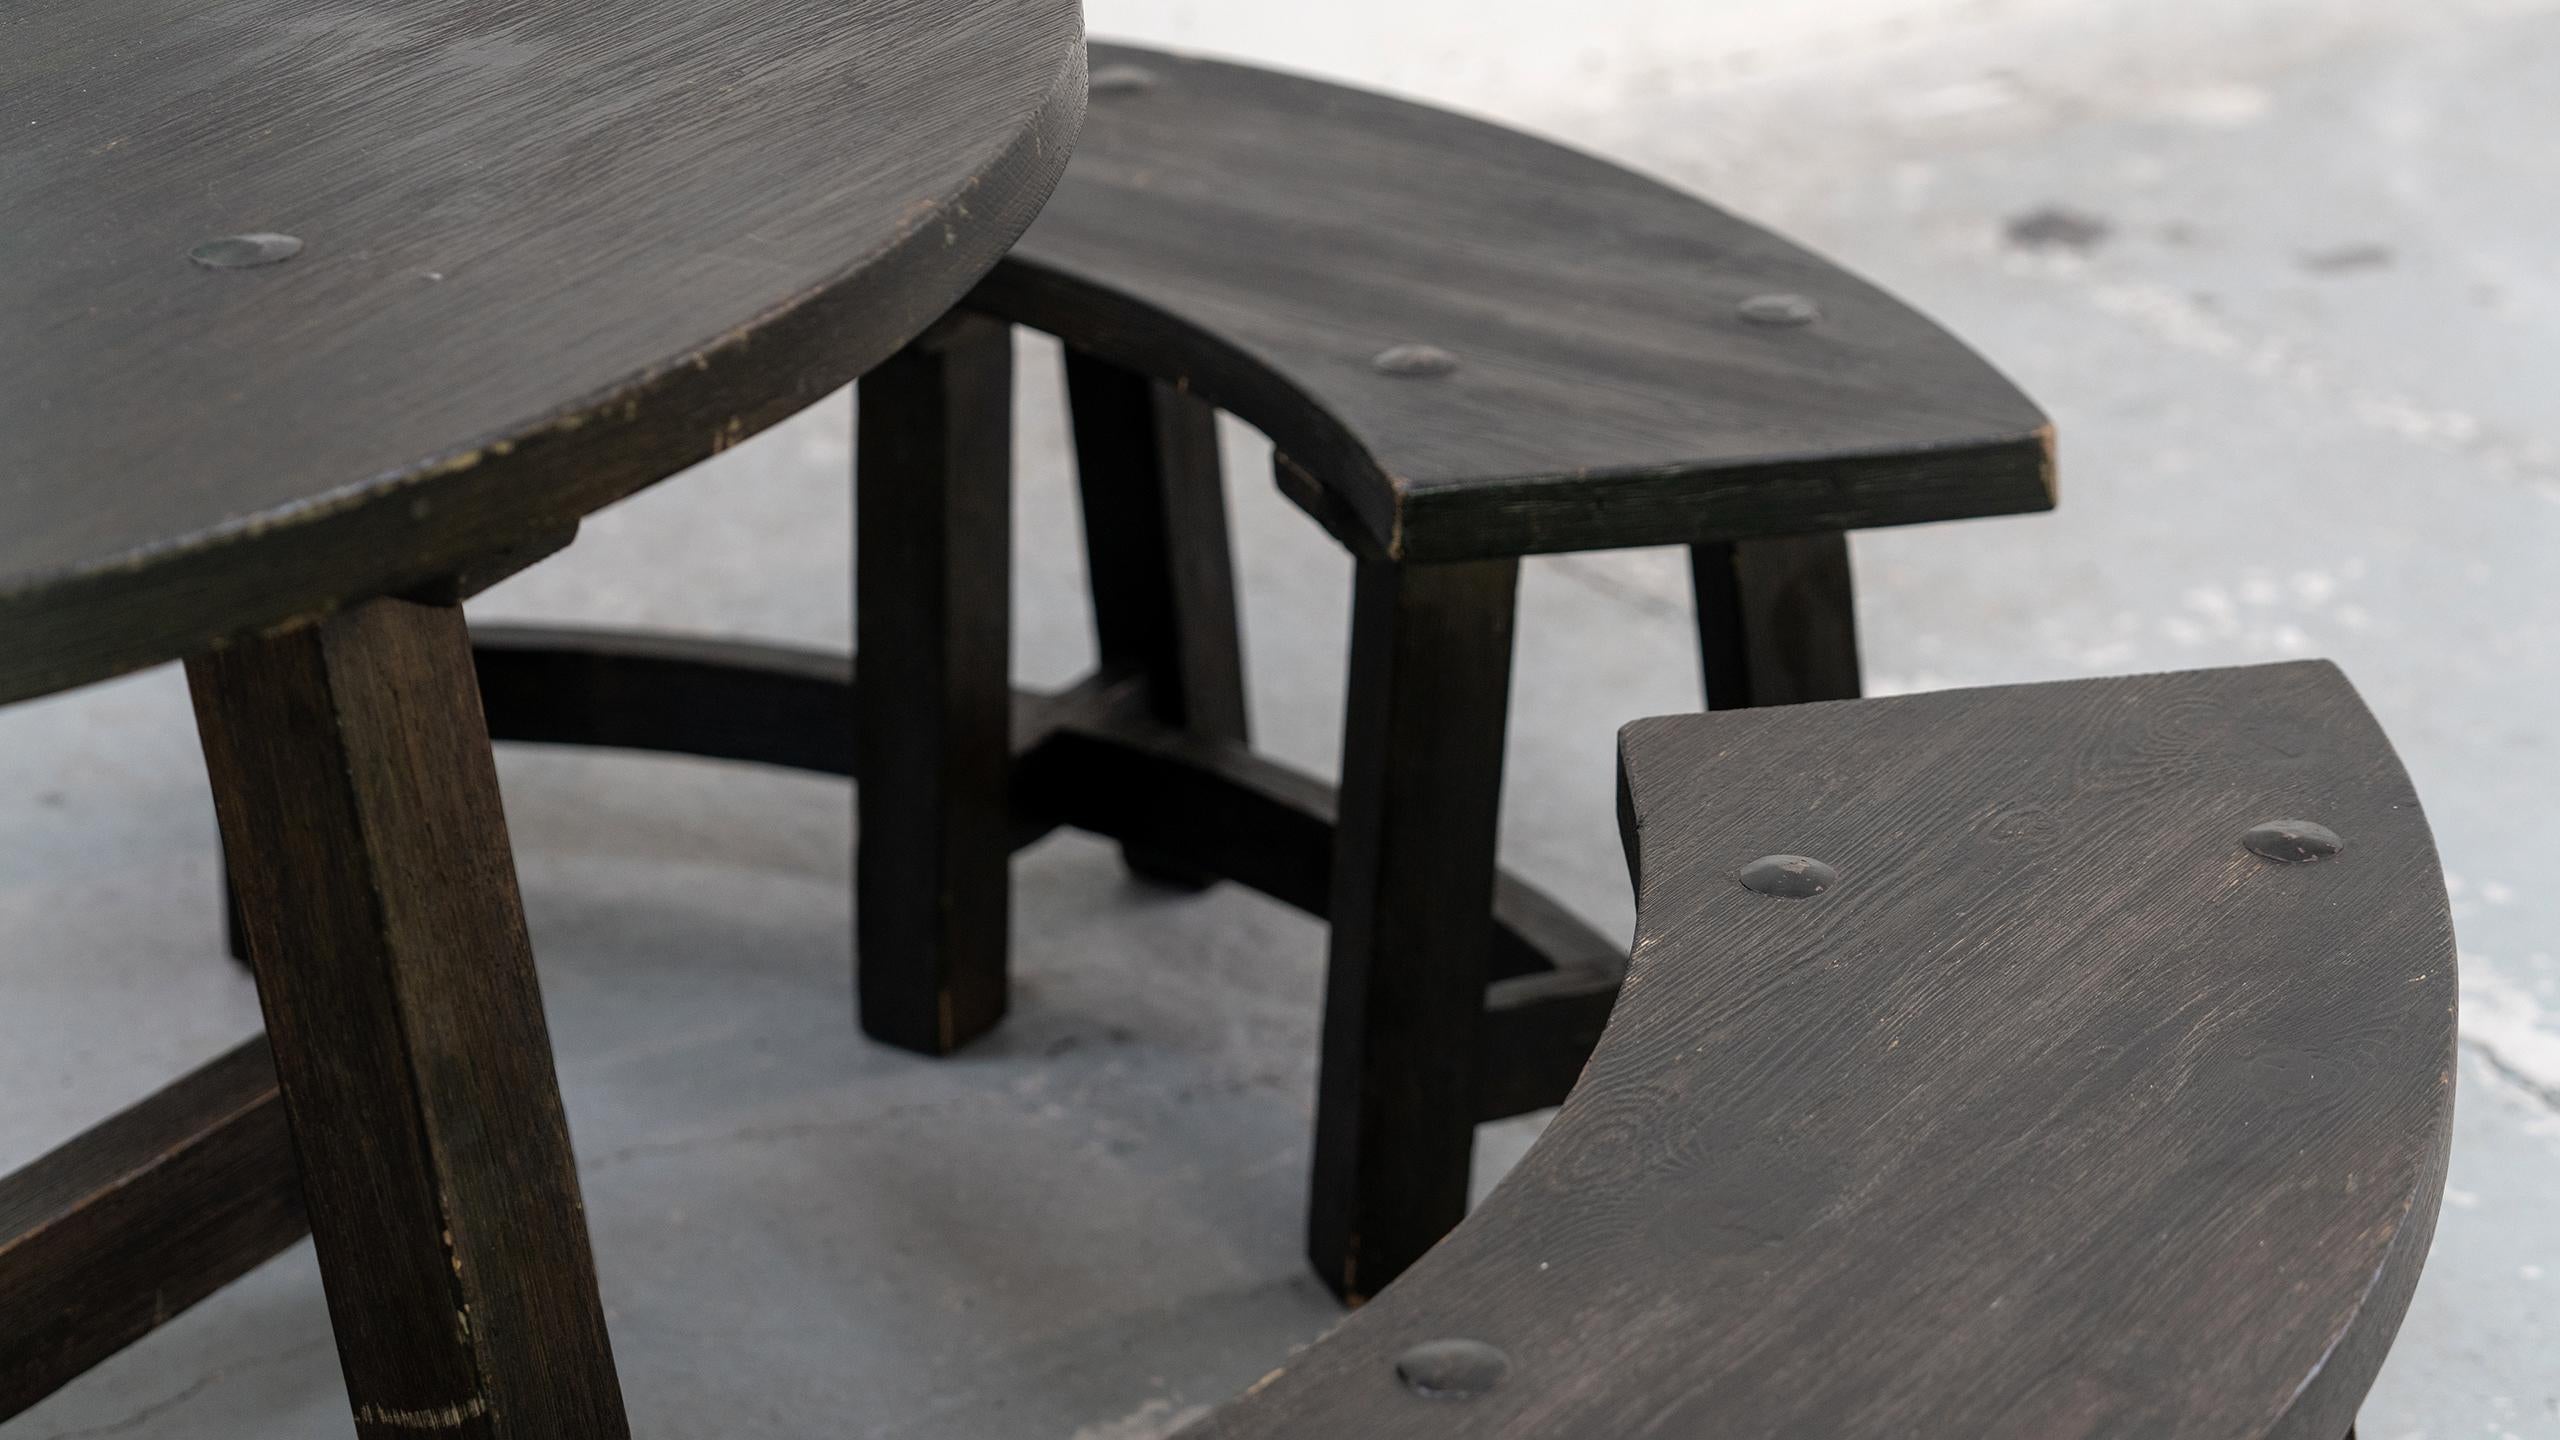 Mid-20th Century Sculpted Brutalist Dining Table & Bench in Solid Ash 1960 Paris Mid Century  For Sale